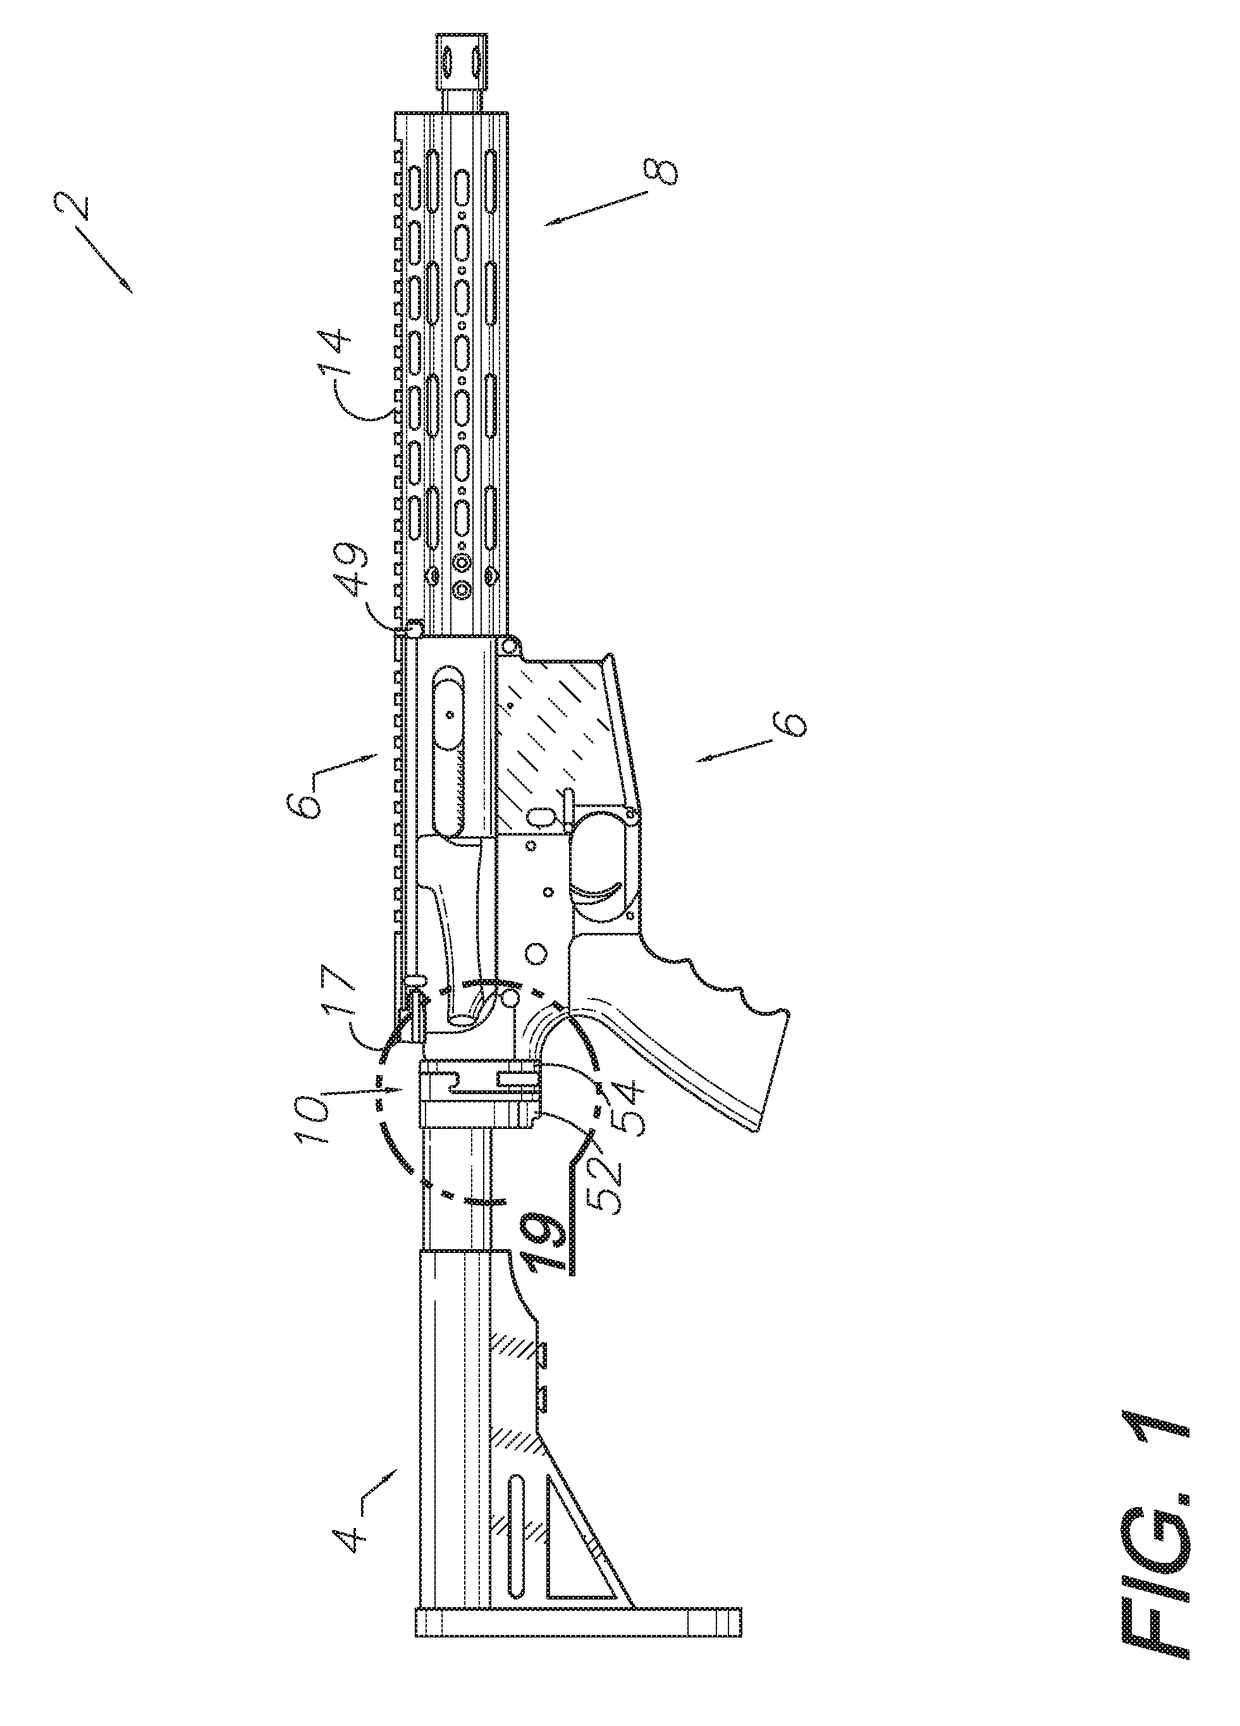 Firearm assembly system and method